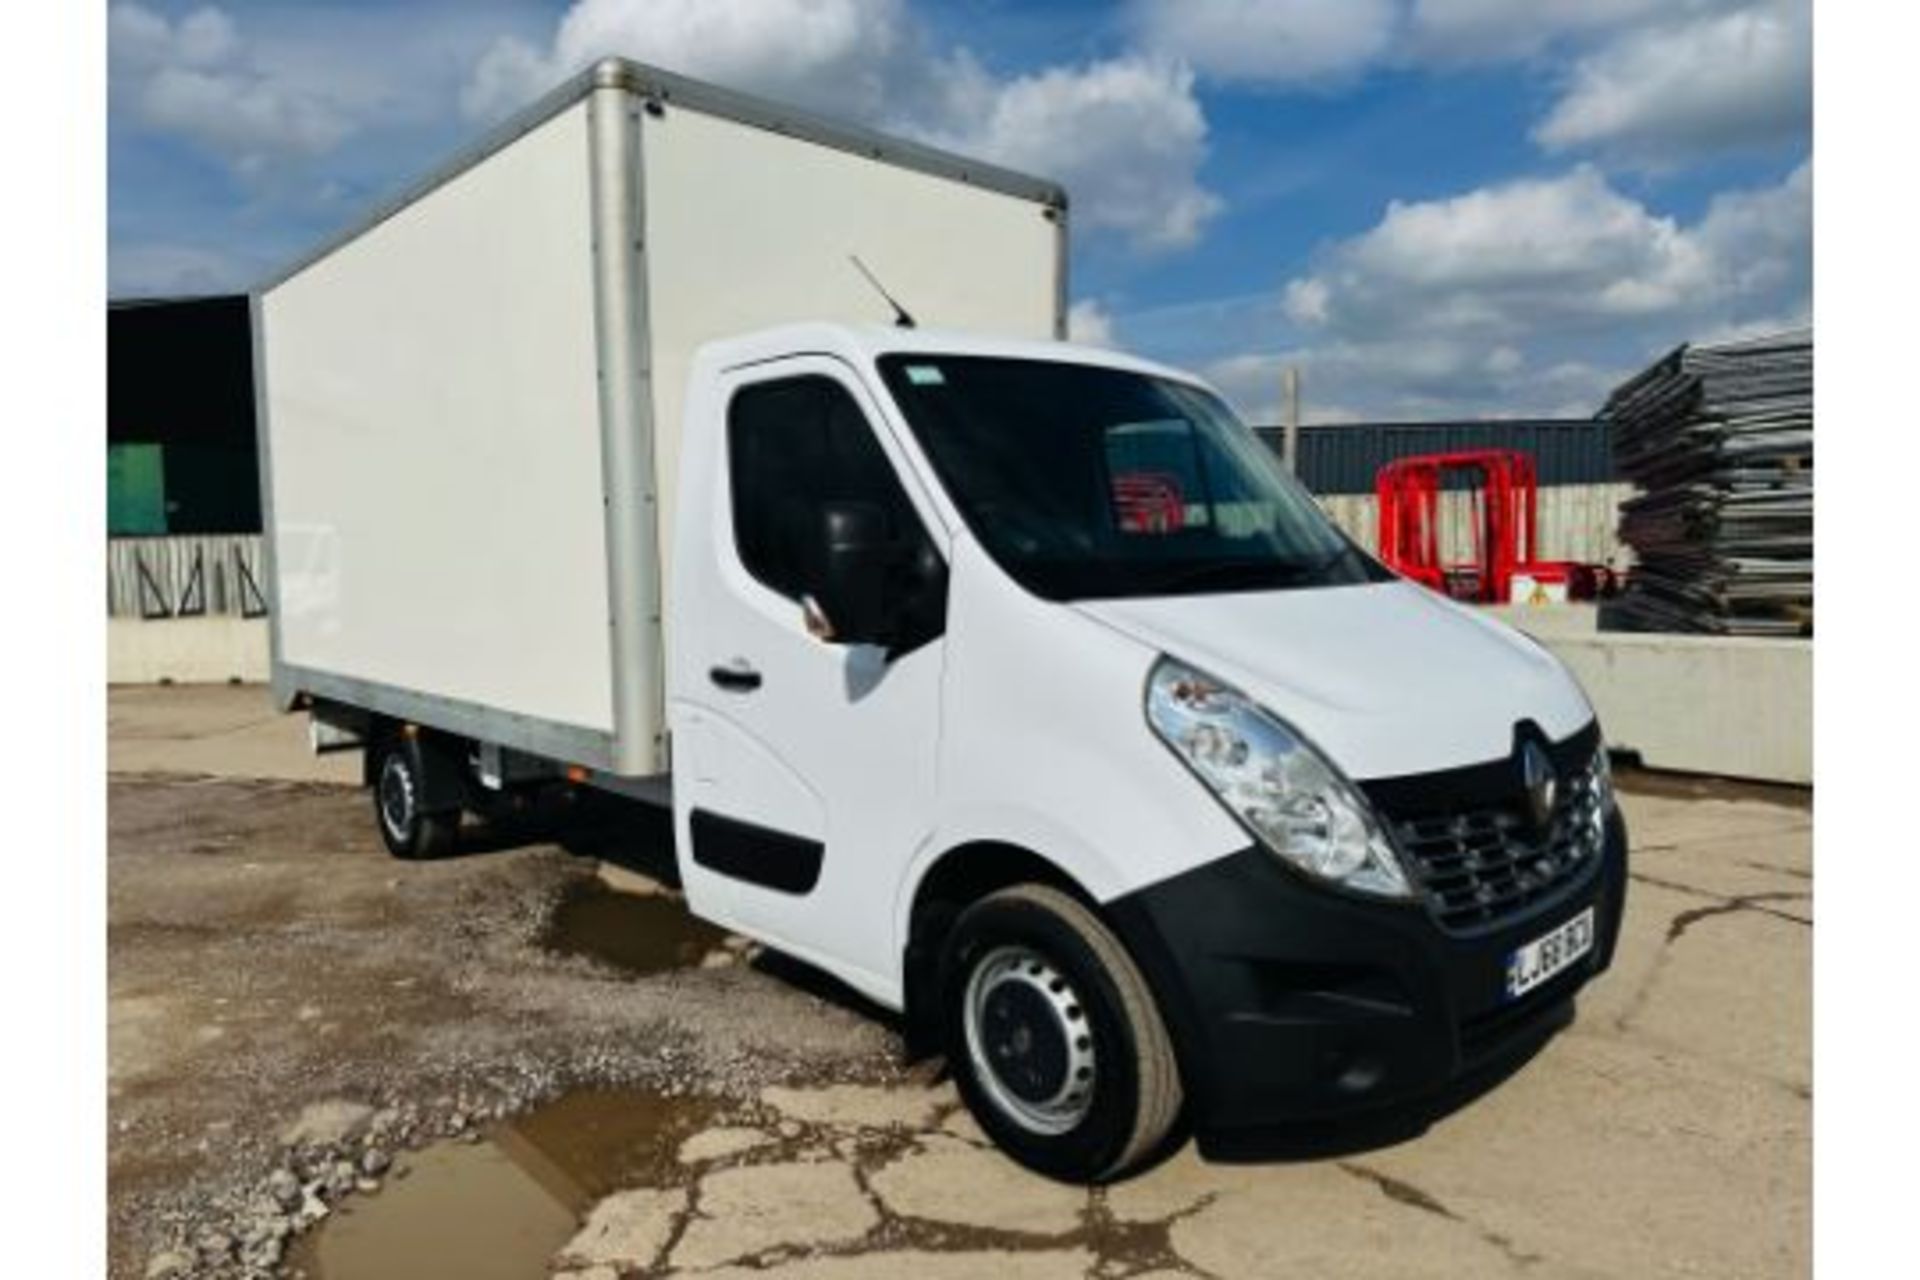 Reserve Met -RENAULT MASTER 2.3DCI (130) Business Edition Lwb Box Van With Electric Tail Lift 68 Reg - Image 5 of 27